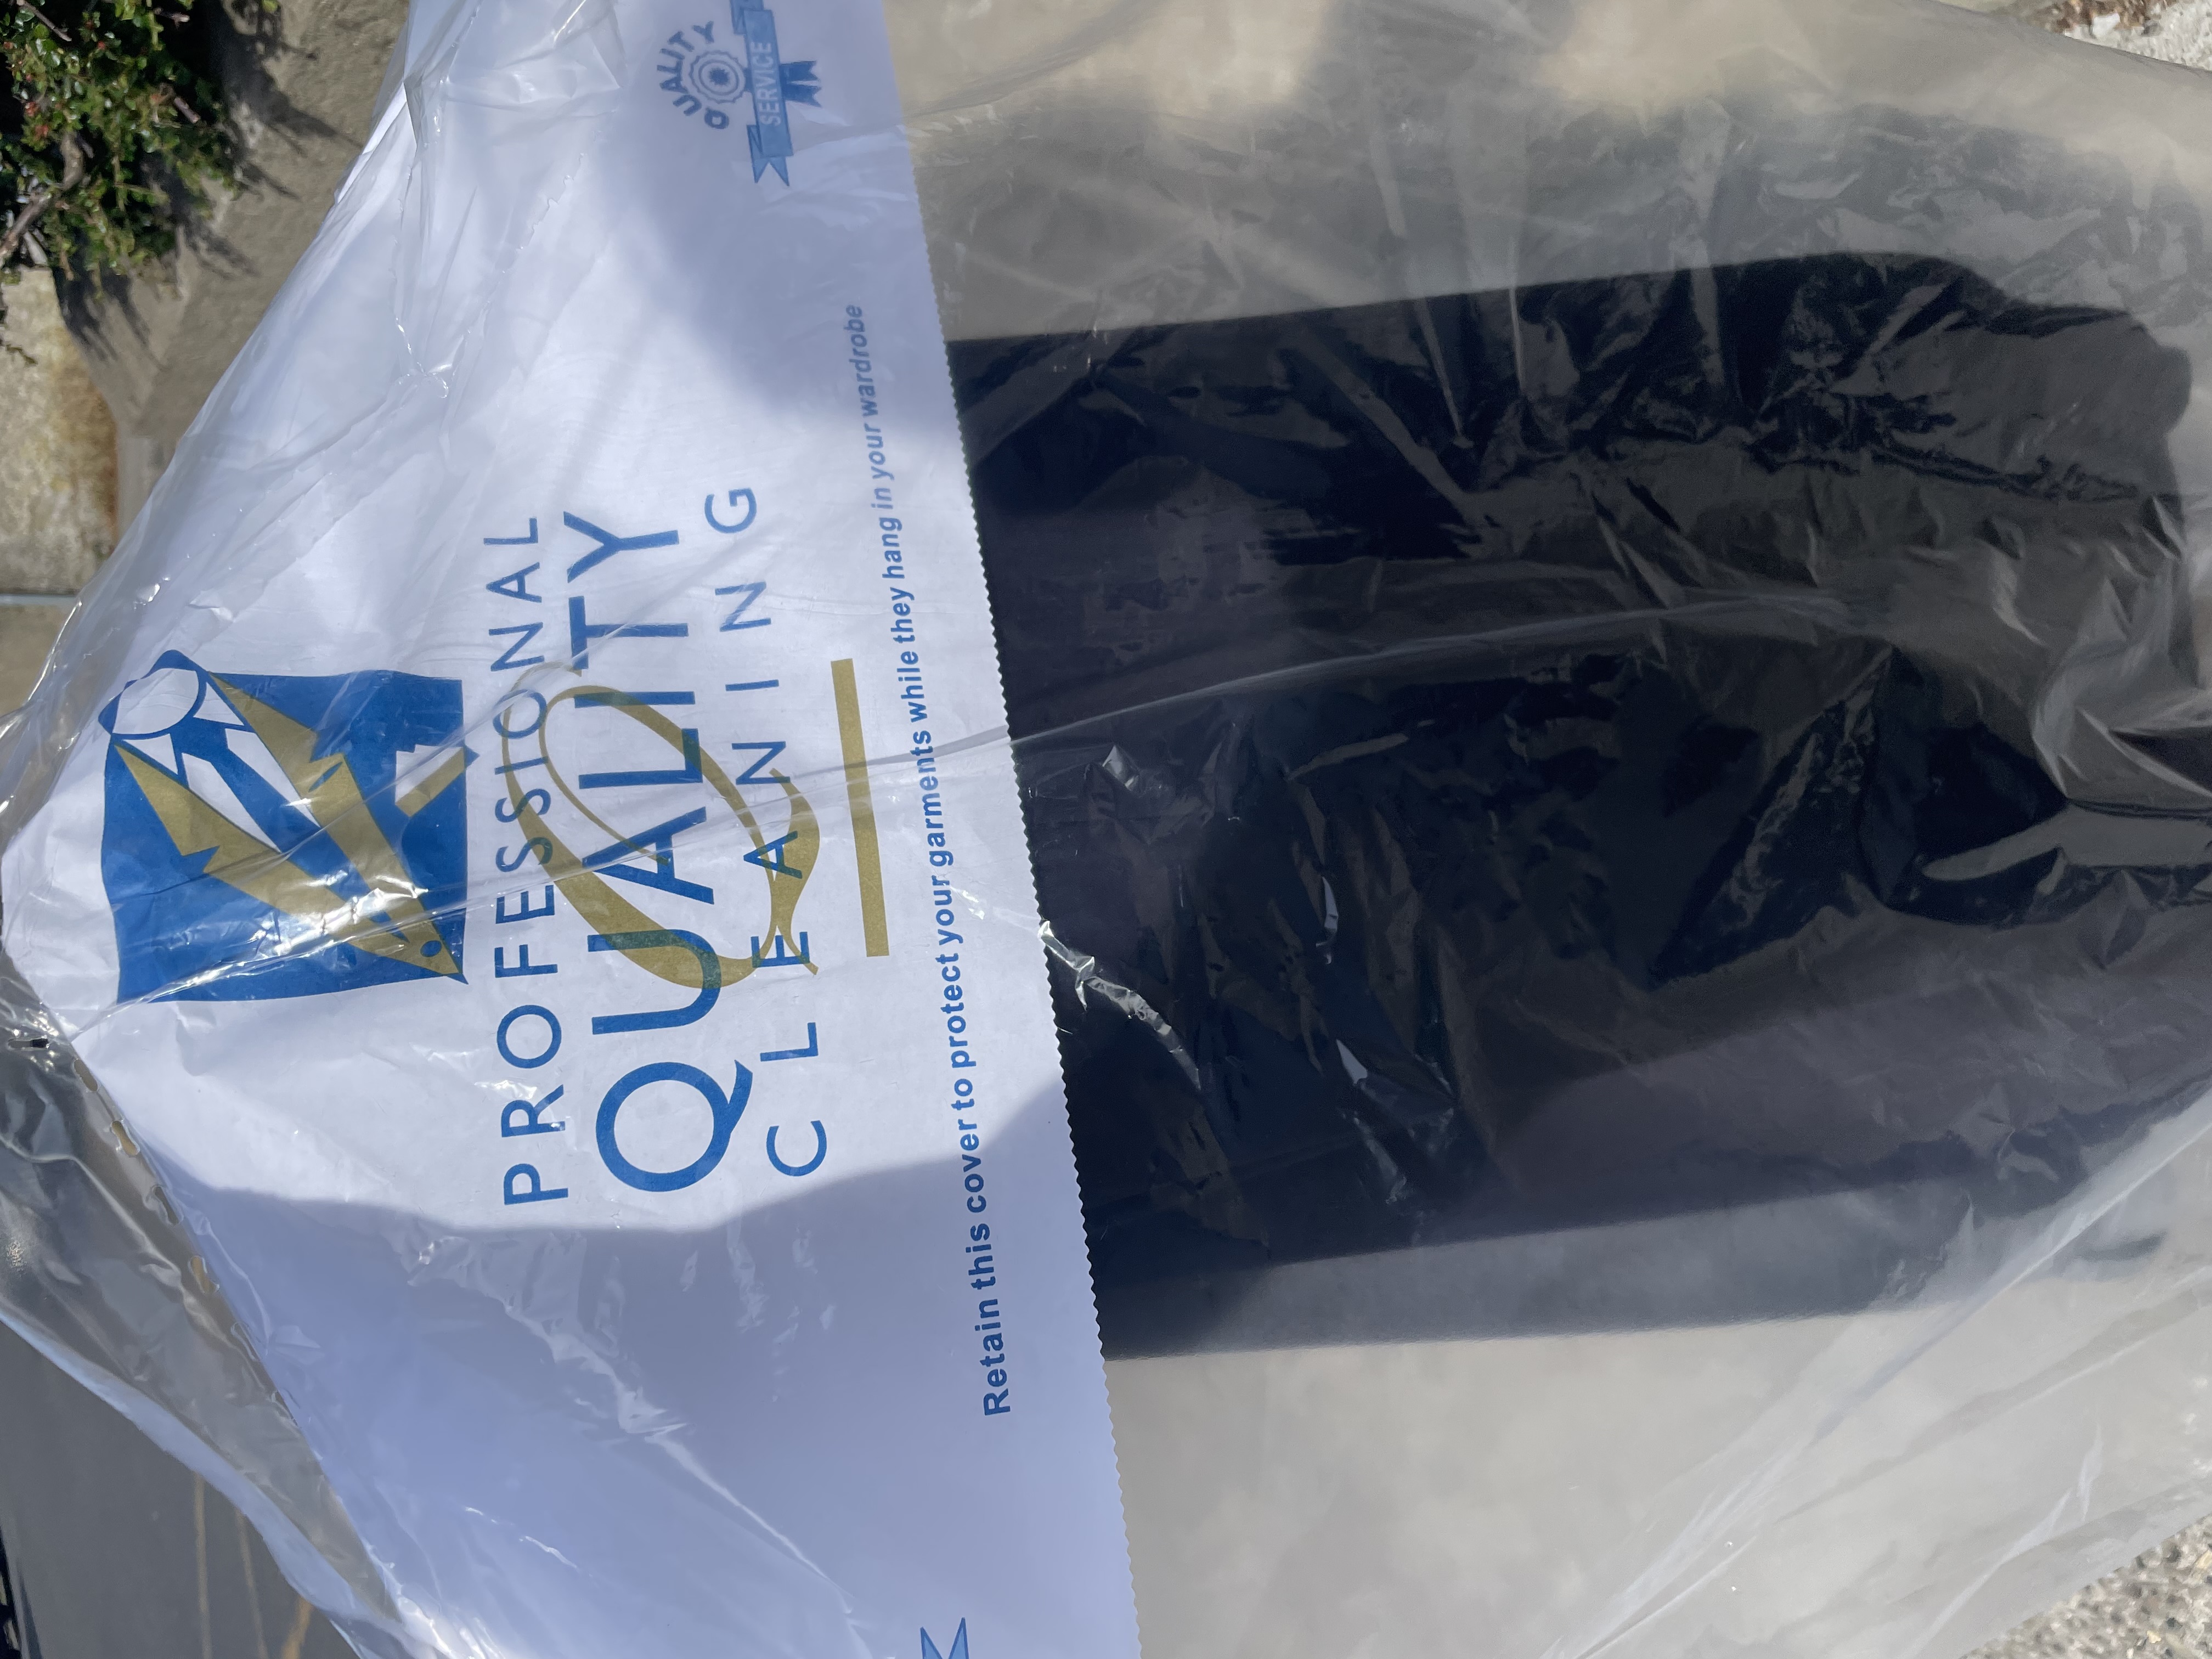 a plastic bag with a black object in it